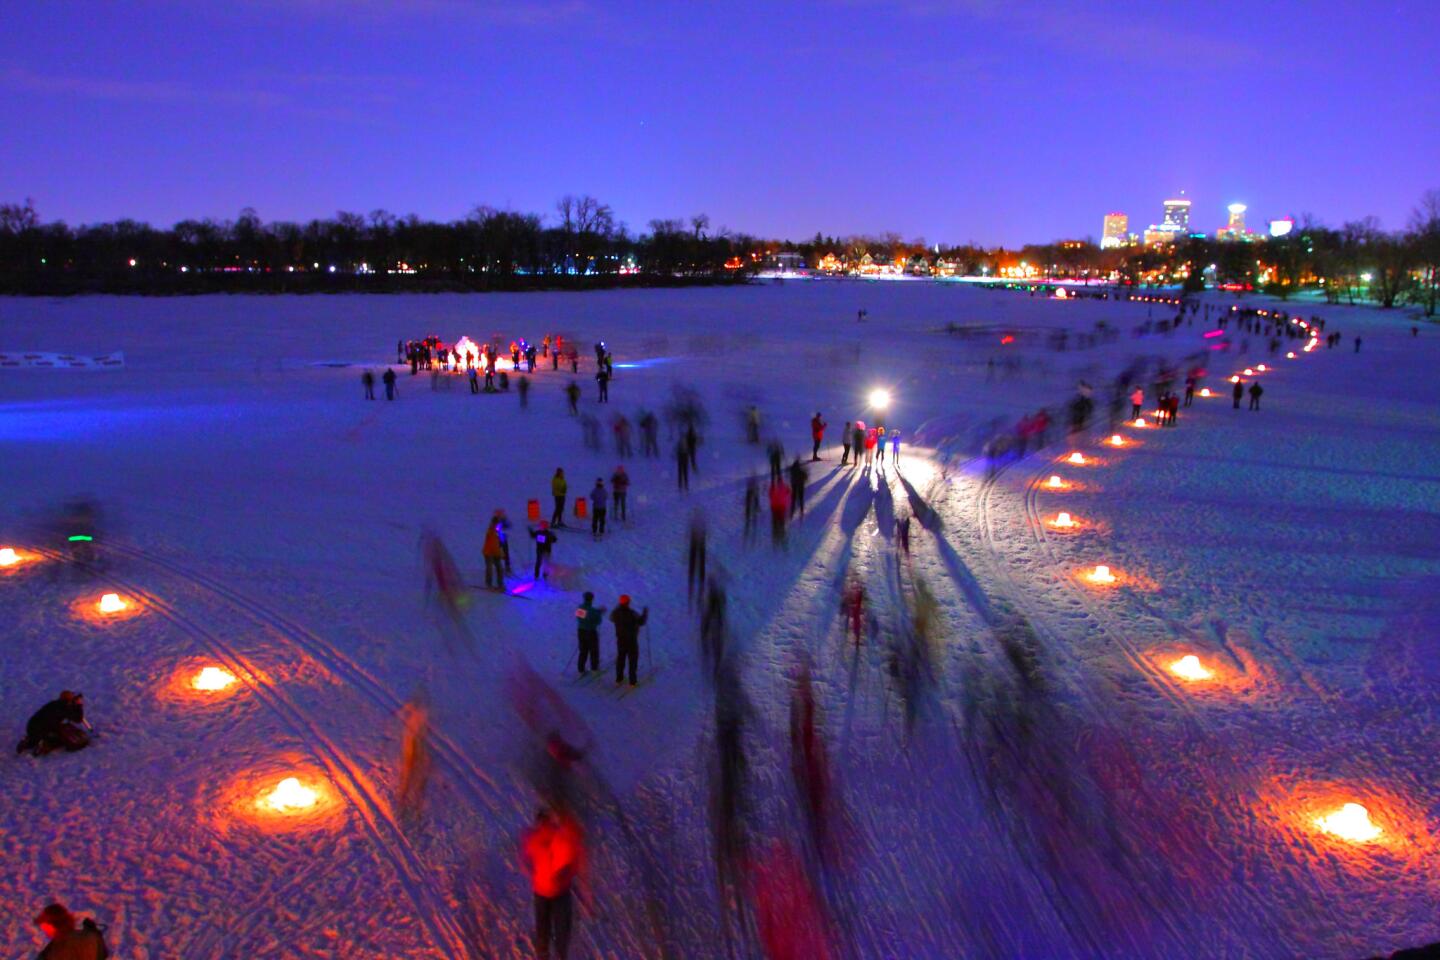 Minneapolis tops the list of big U.S. cities likely to deliver on a white Christmas, according to data from AccuWeather. (The city's annual Loppet ski festival is shown here.)